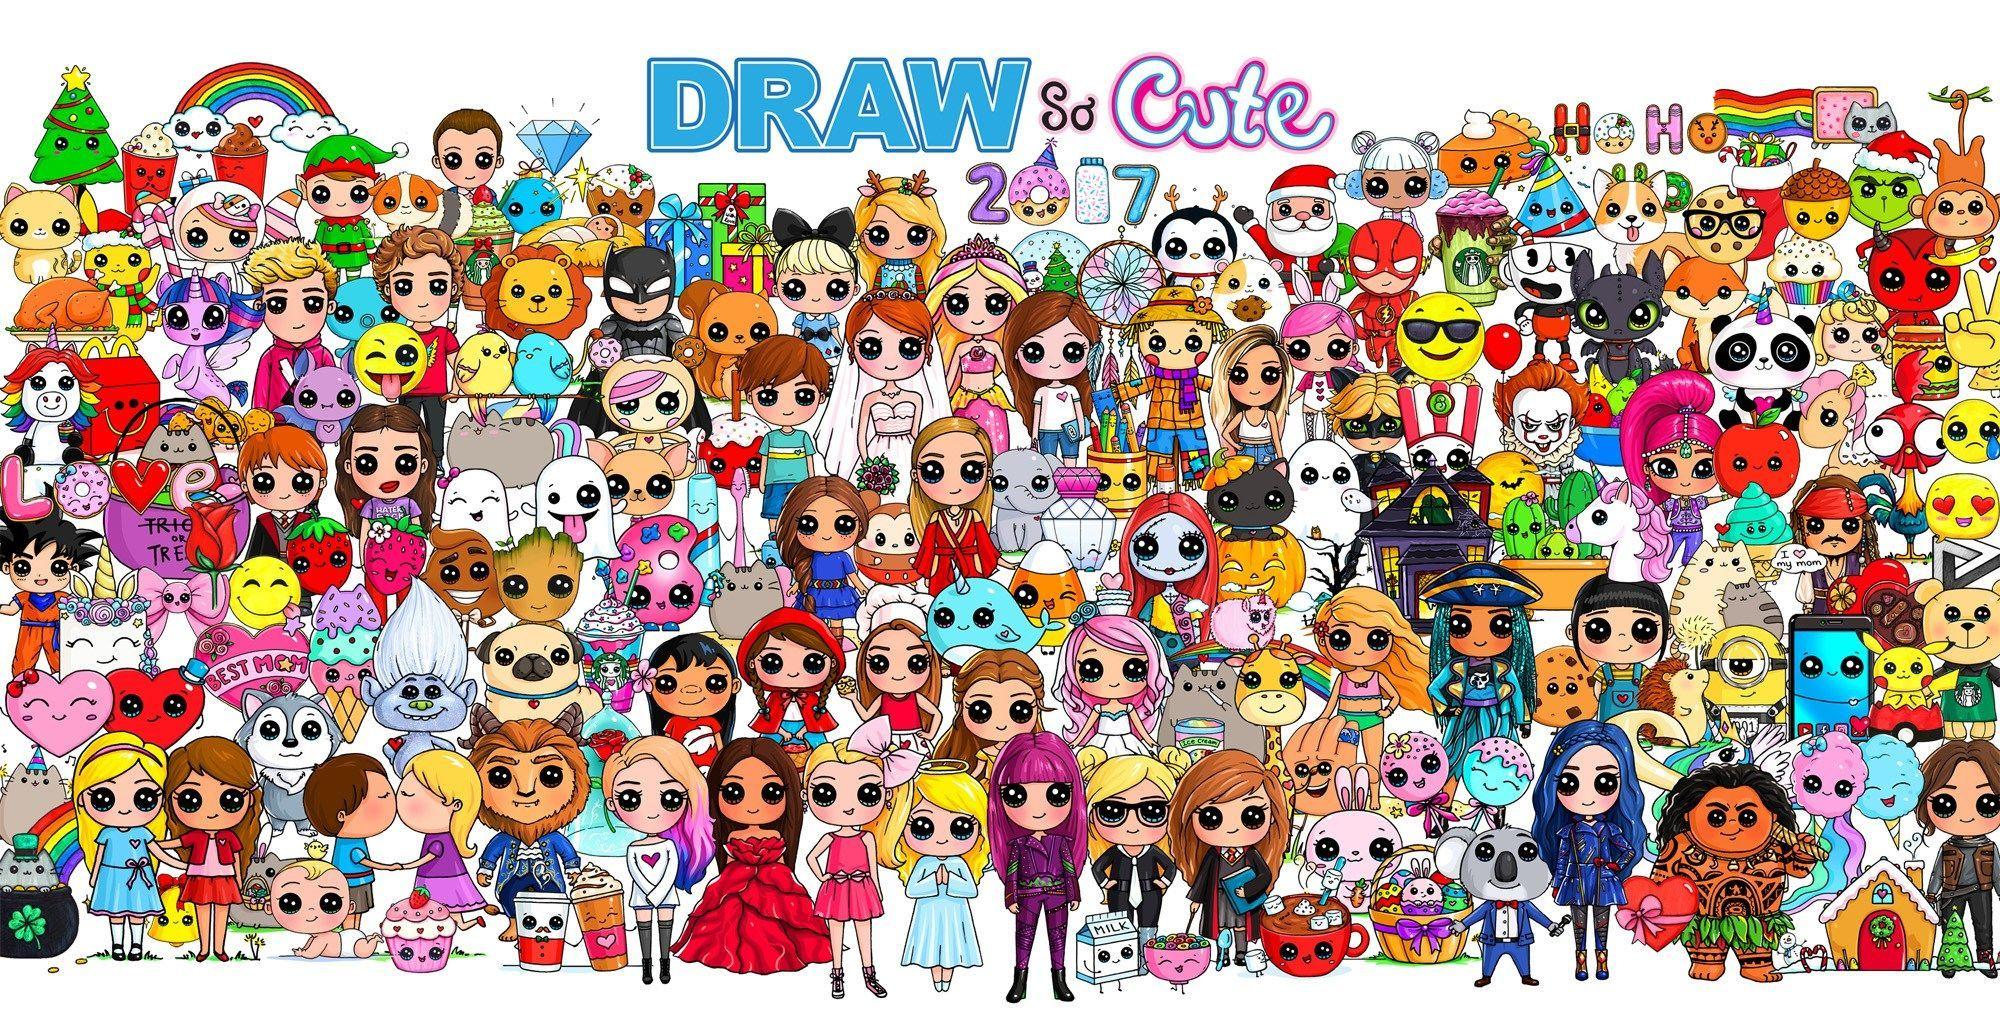 Join me as I draw draw so cute 2018 using watercolors and markers